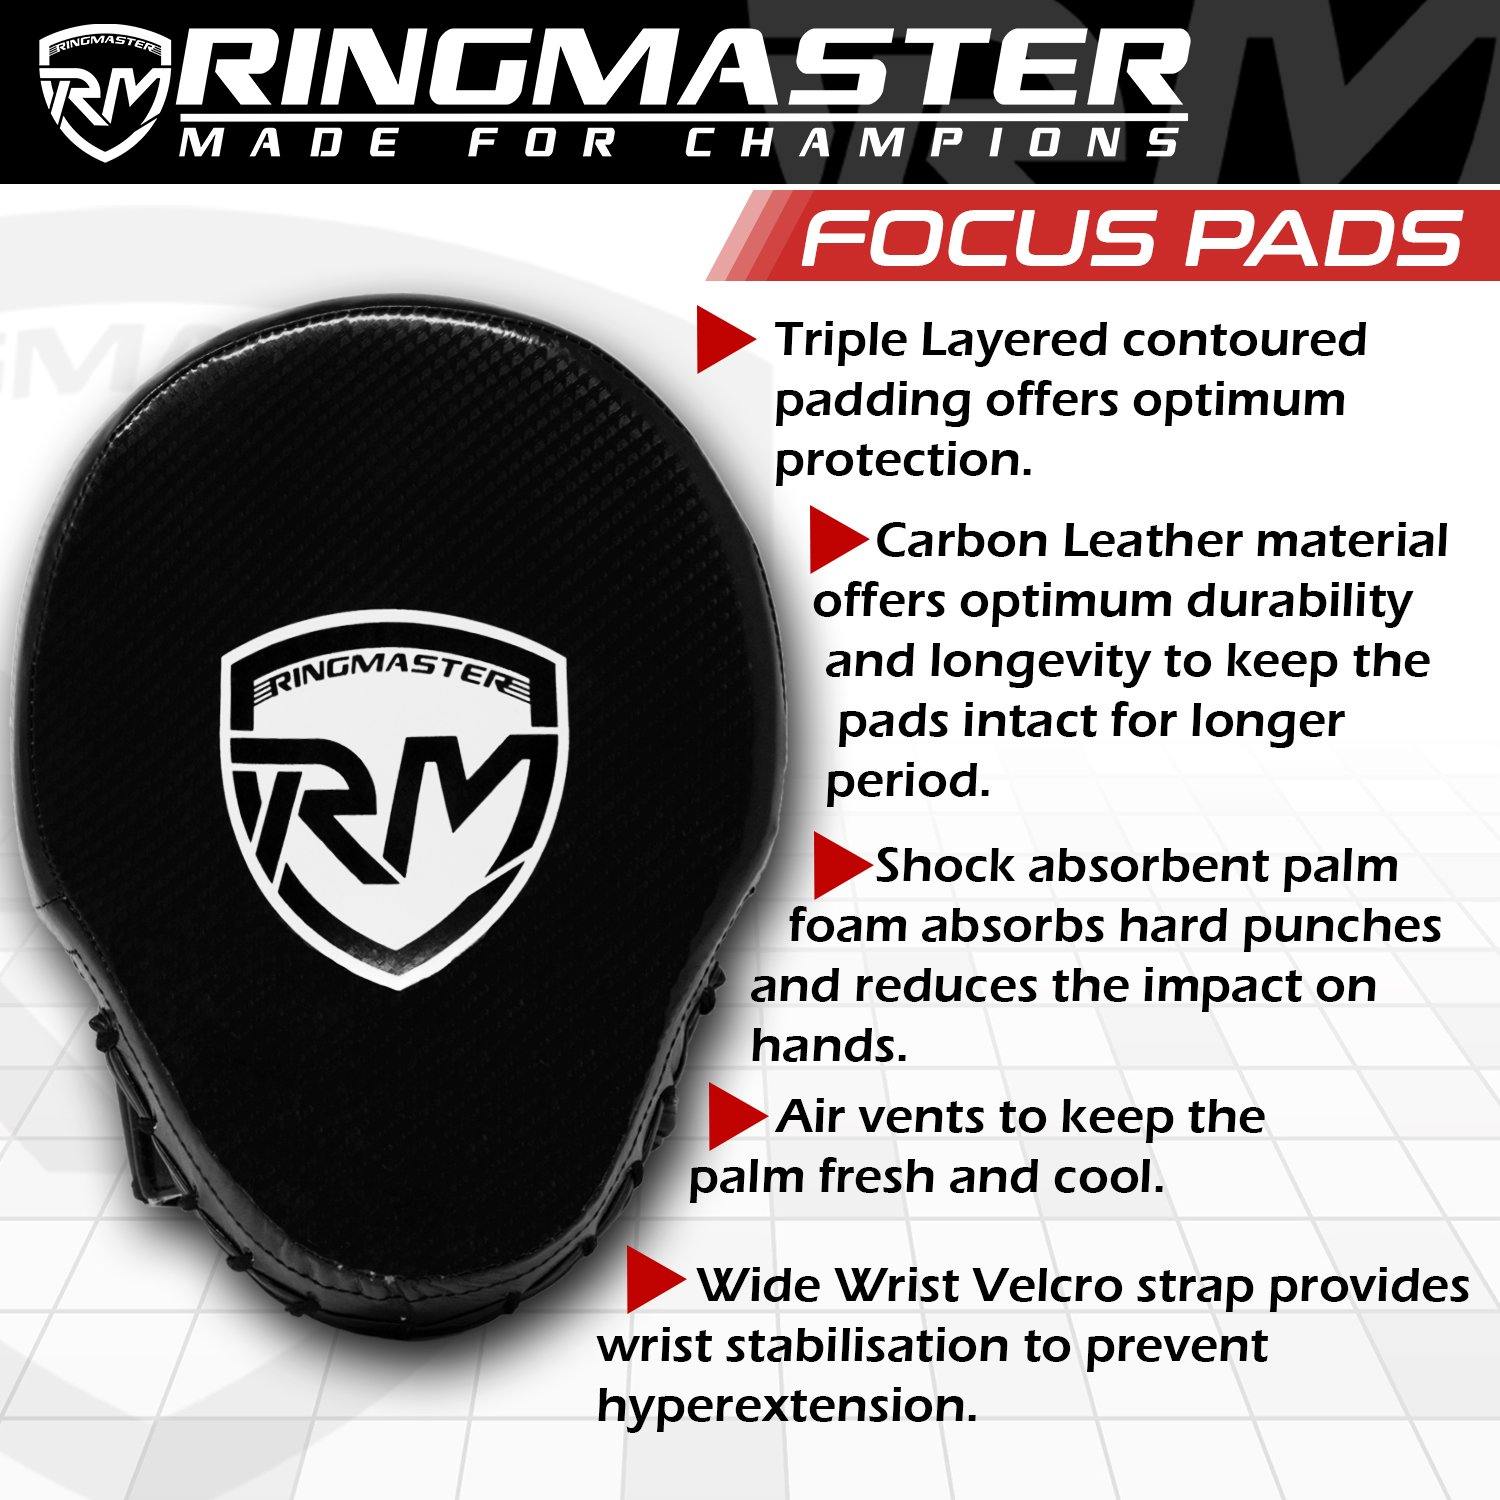 Hook and Jab Pads, boxing pads, punching pad, focus pads, kickboxing pads, focus pads boxing, boxing pad price, focus mitts, sparring pads, boxing gloves and pads, Ringmaster Sports Boxing Equipment, Ringmaster Sports Boxing pads, Ultralight Focus Pads Carbon Leather One Size Black